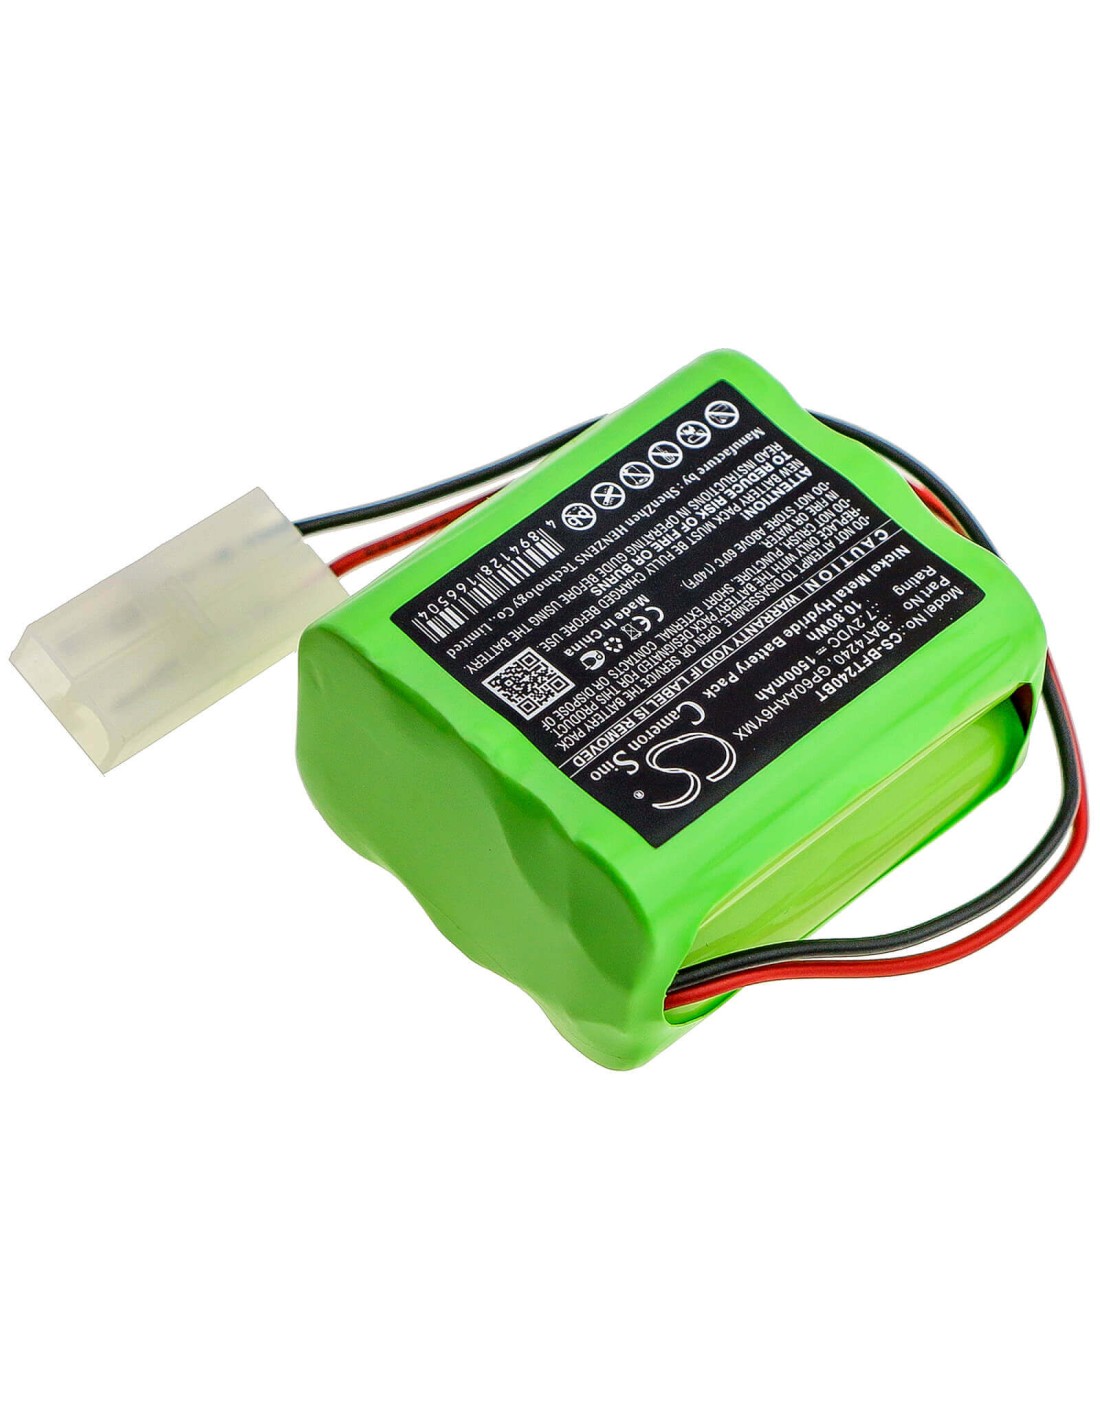 Battery for Burley, Gas Fire 7.2V, 1500mAh - 10.80Wh